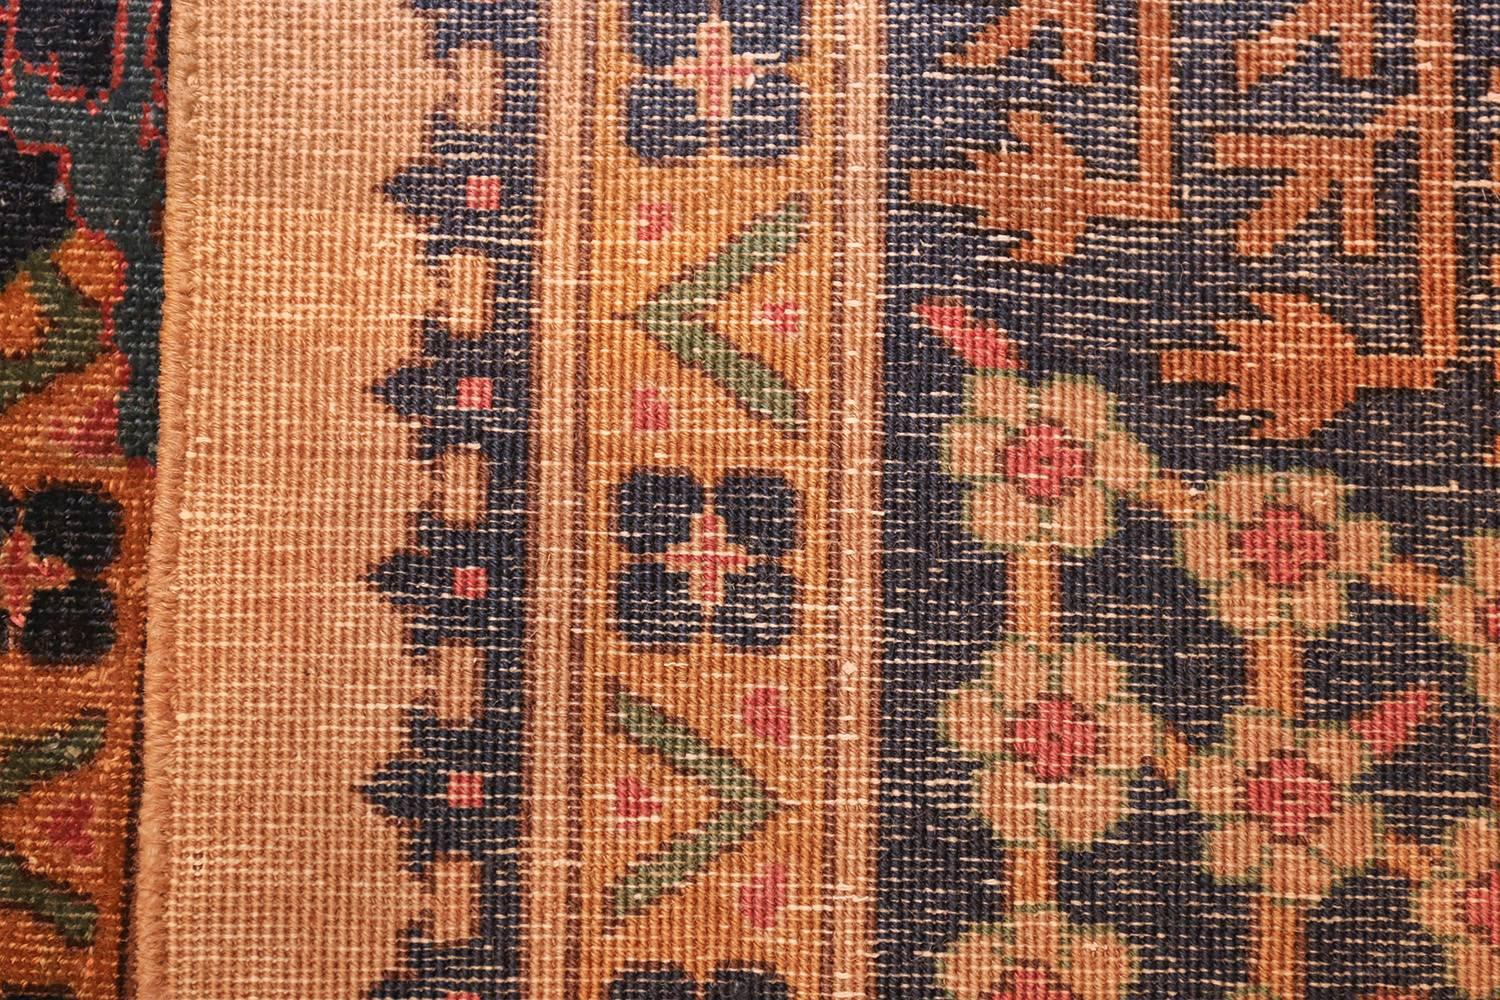 Antique Indian Carpet, 1900 -- Flawless geometry and a magnificent intricate pattern define this beautiful Agra carpet. Boasting the lush hues singular to Agra carpets, this stunning piece is a study in complexity, richness, and artful beauty.